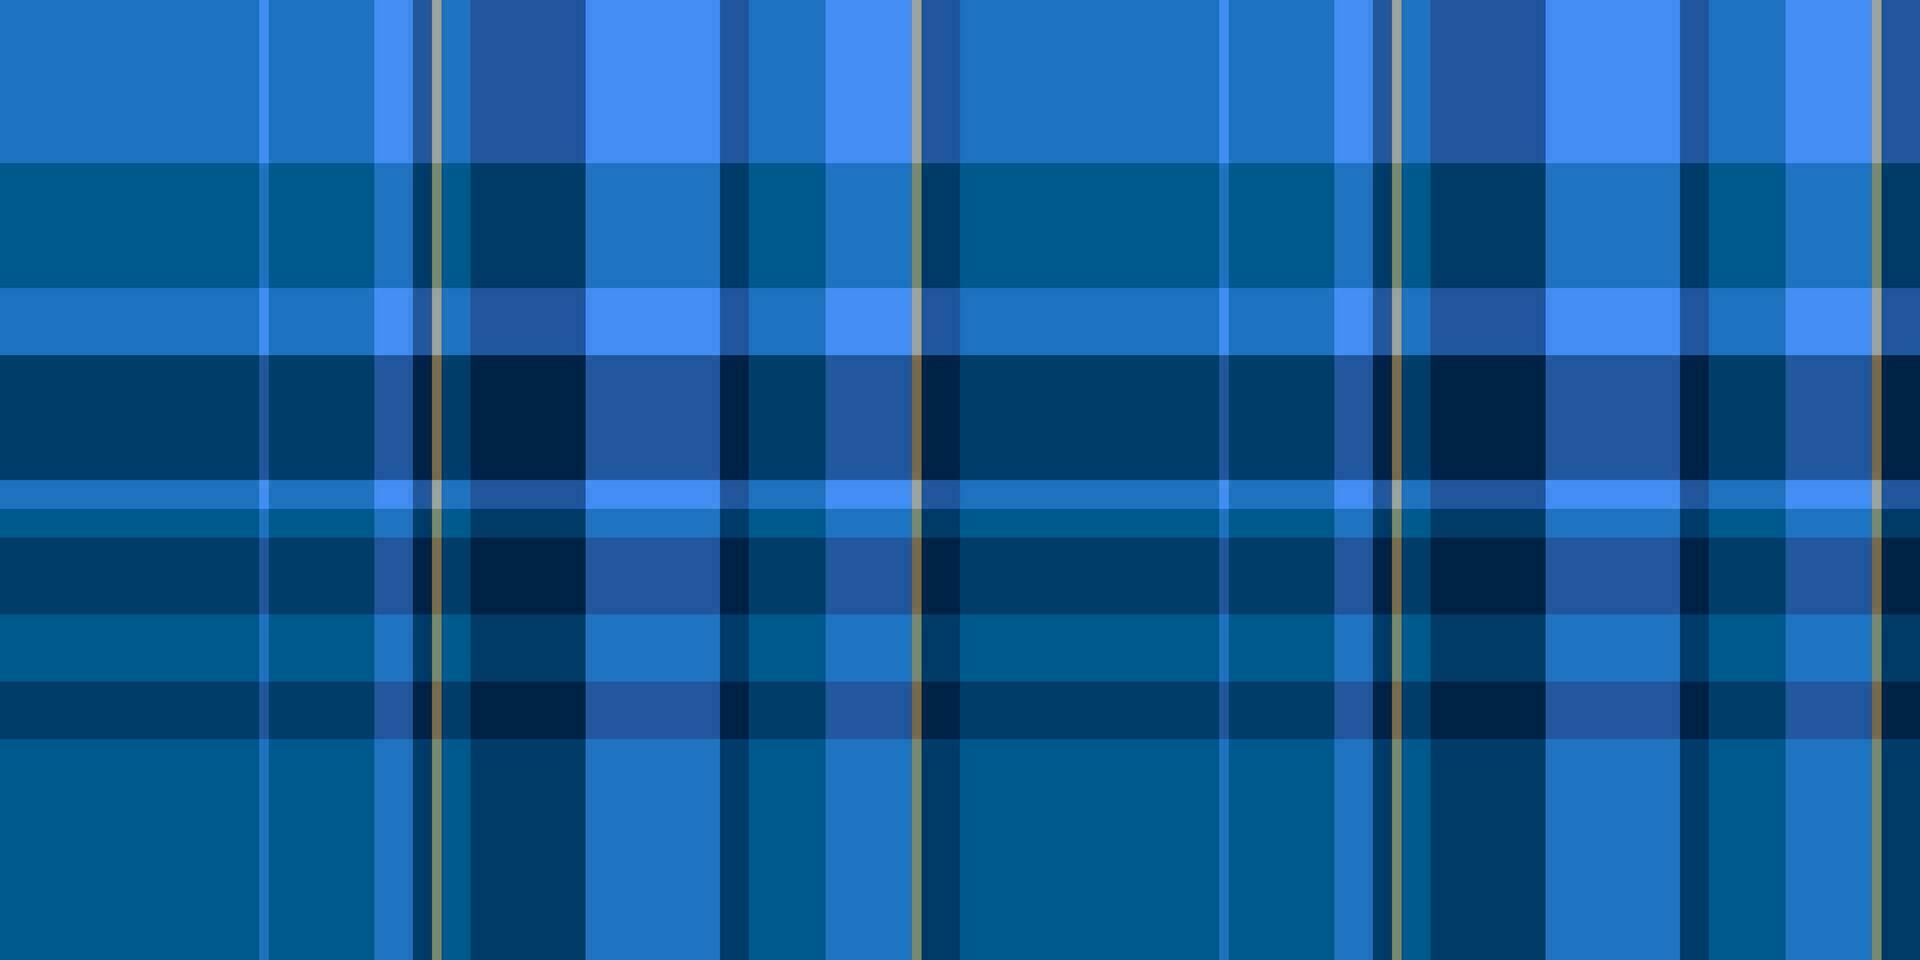 Tribal textile tartan check, design background pattern texture. Rough seamless fabric vector plaid in blue and cyan colors.